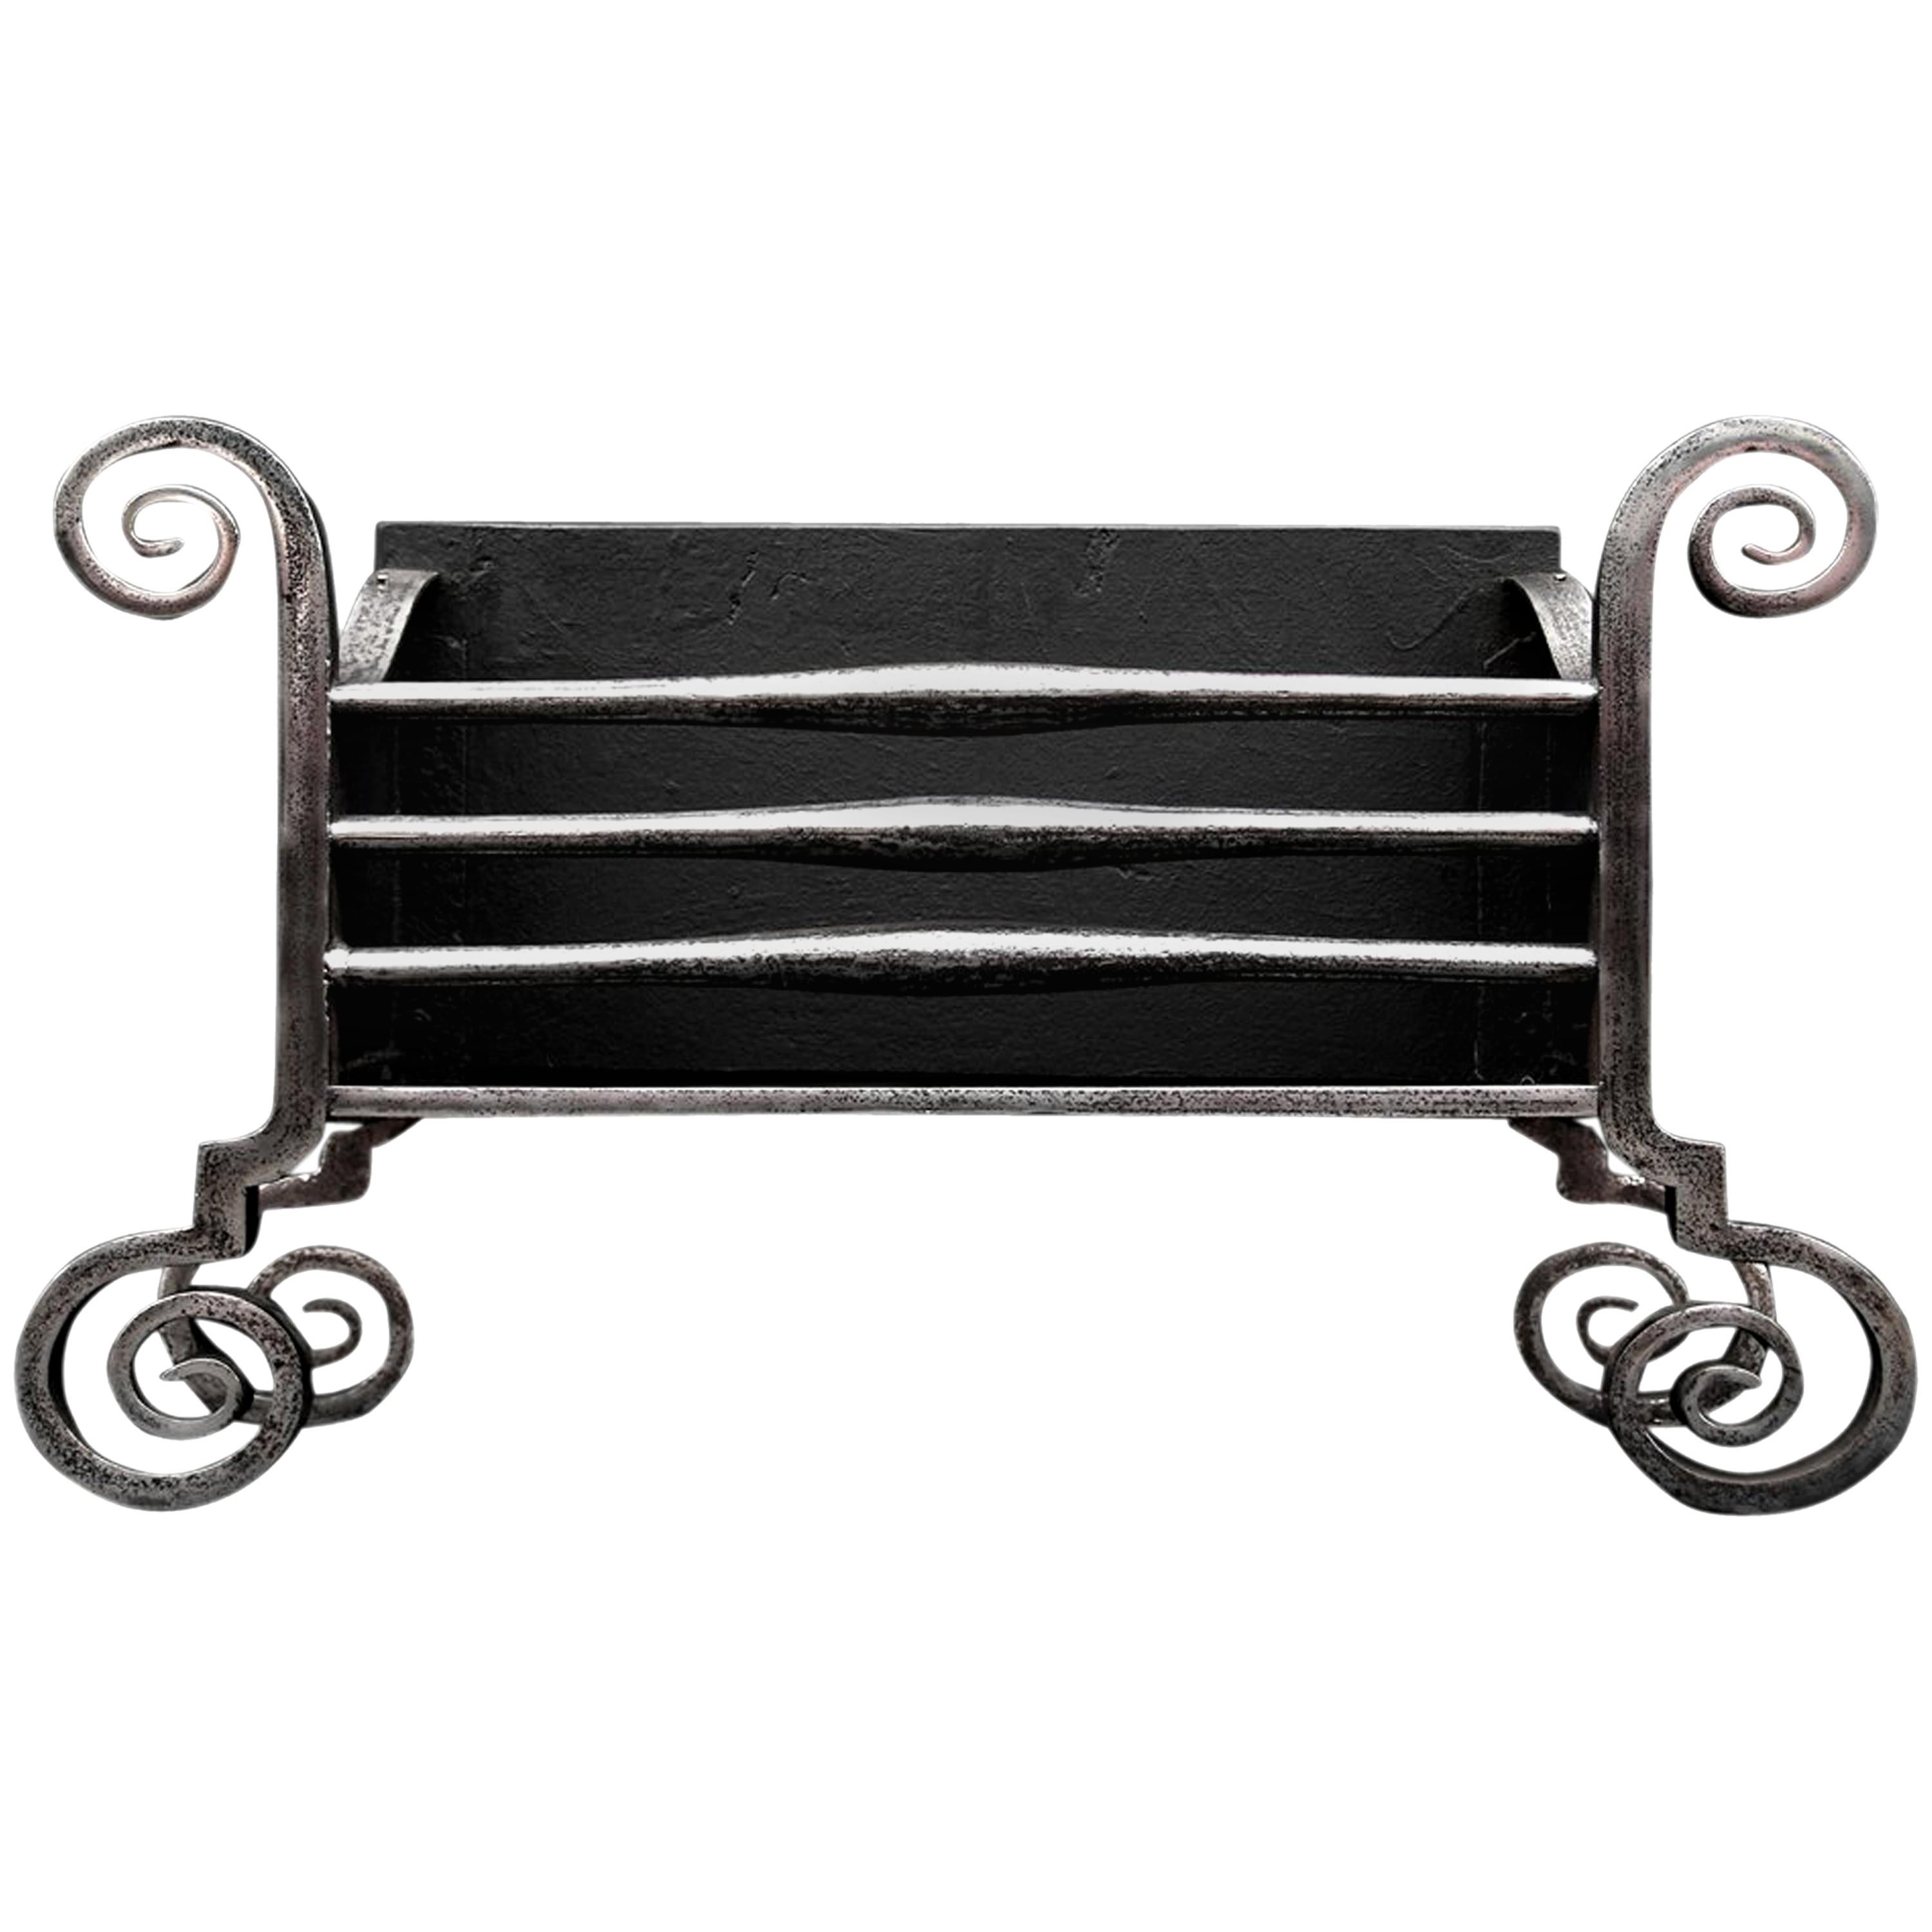 Large Scrolled Wrought Iron Firebasket in the Arts & Crafts Manner For Sale